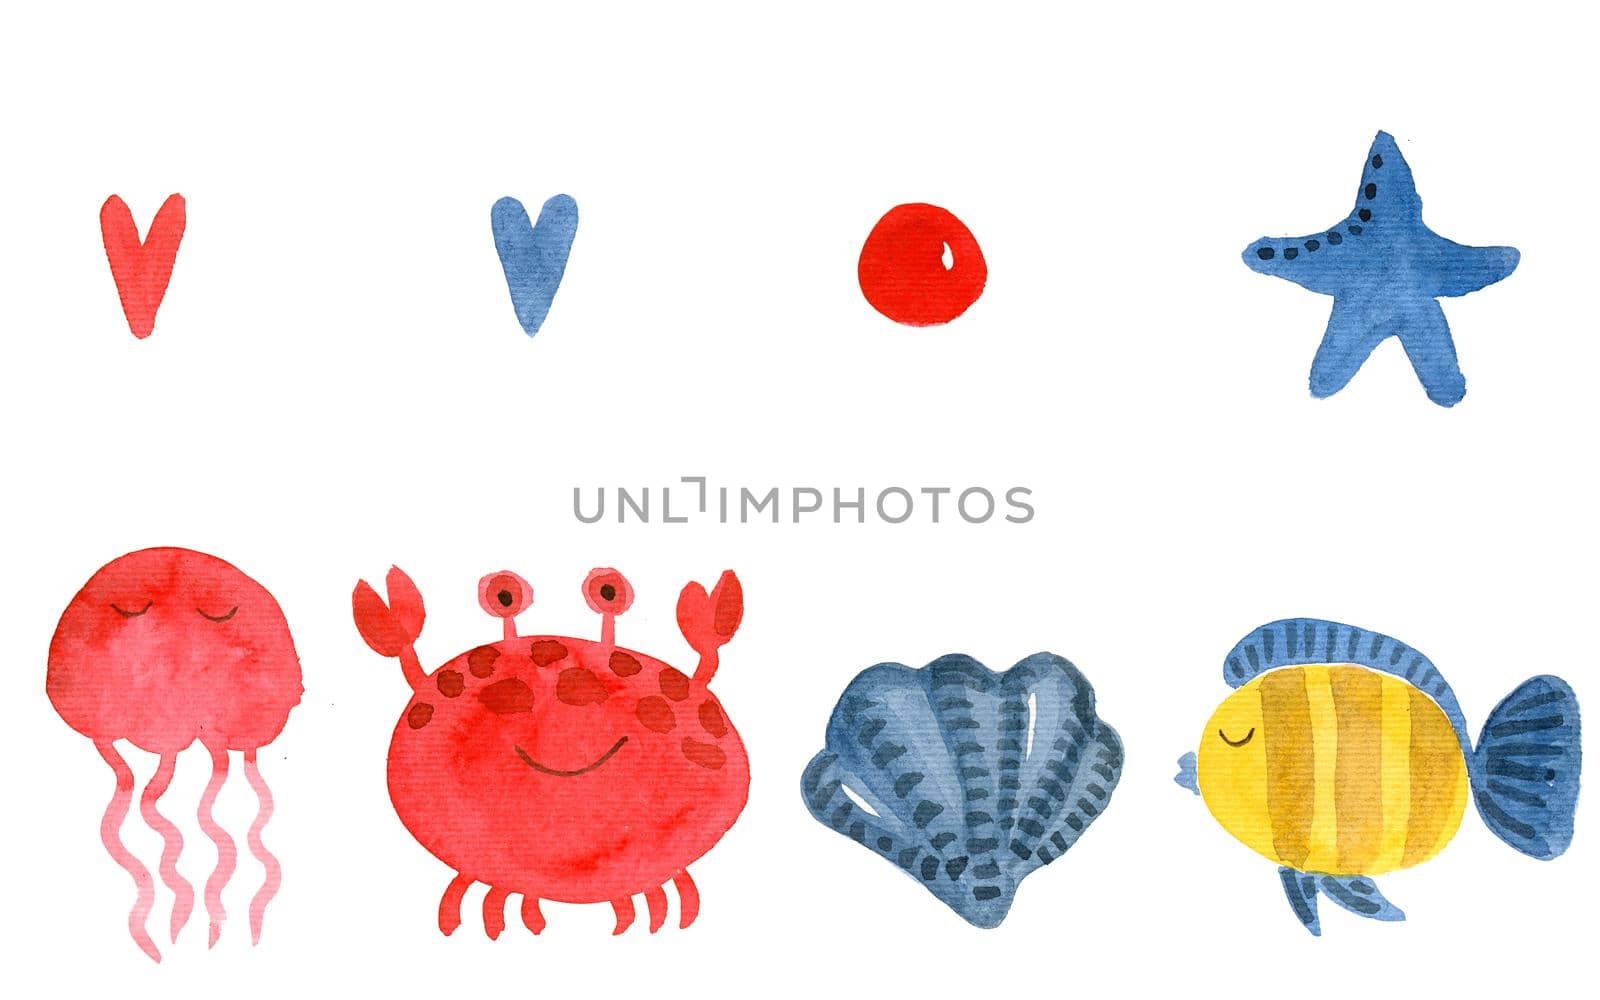 Watercolor set of funny sea animals. Cute jellyfish, crab, shell and fish, as well as decorative elements for decoration.